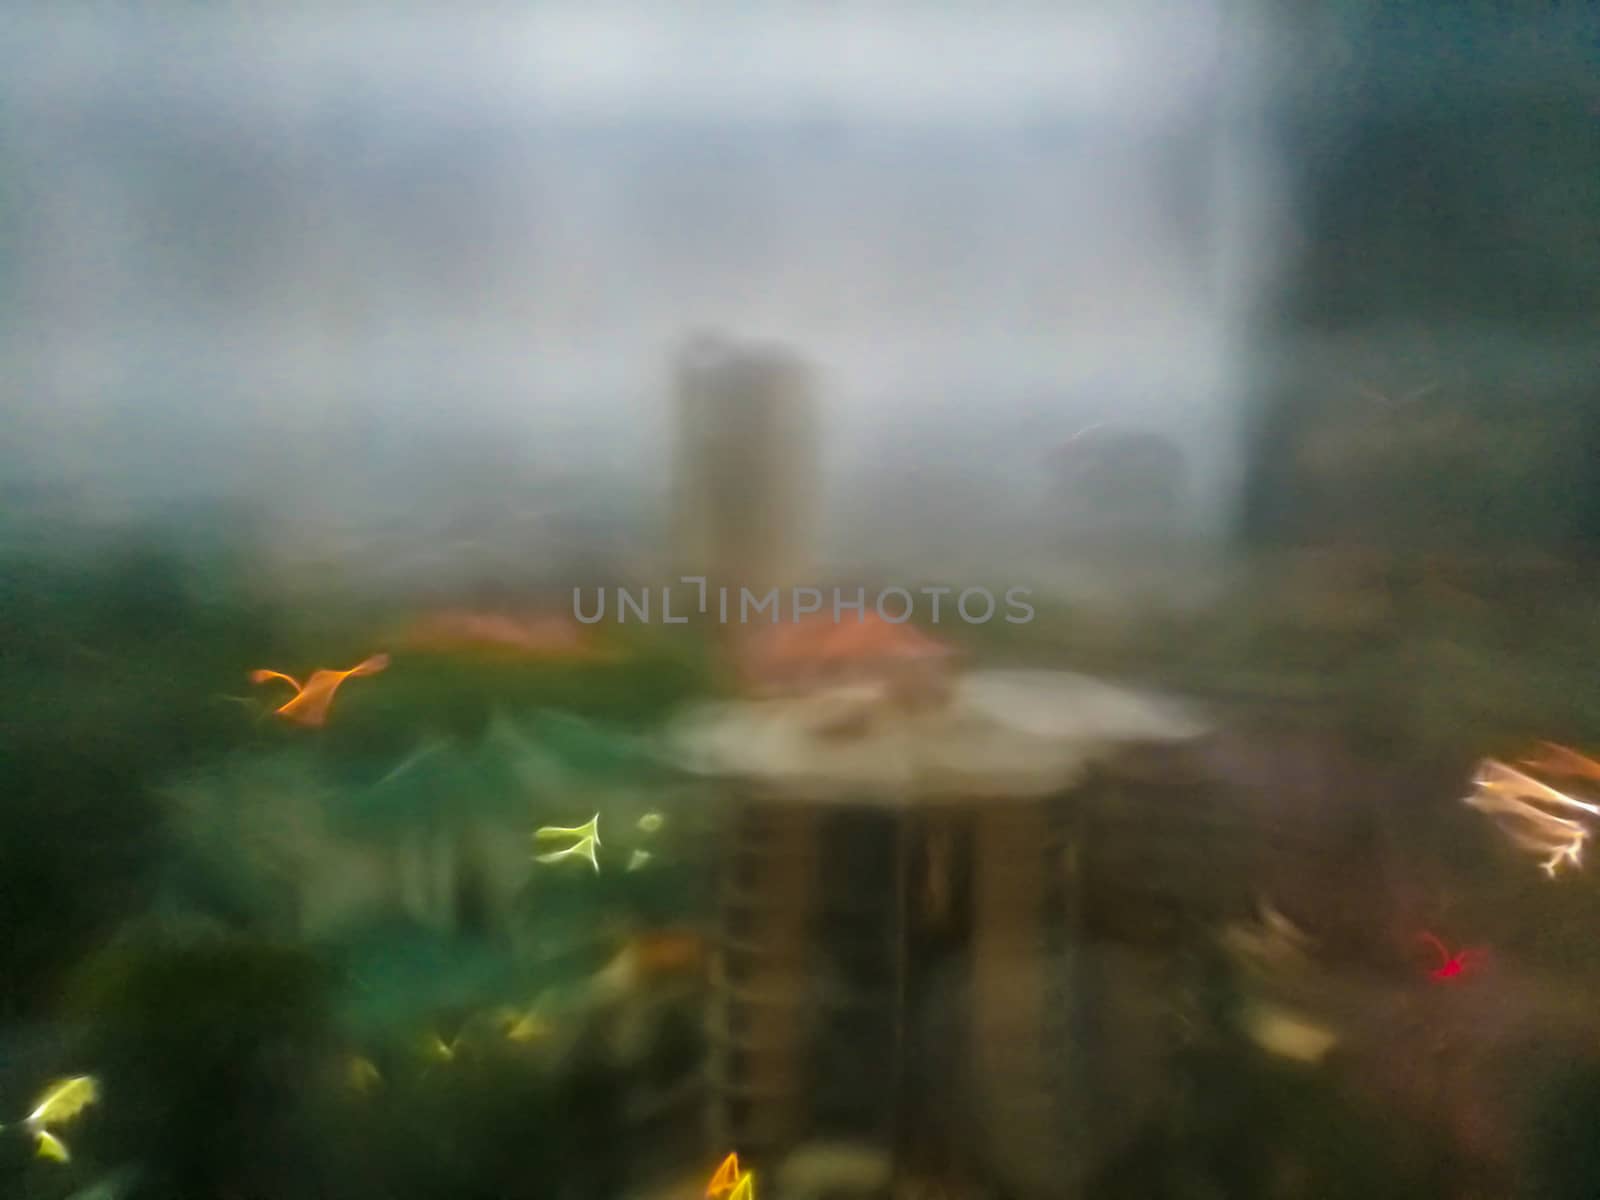 Defocused abstract scene of window outlook in rainy day evening